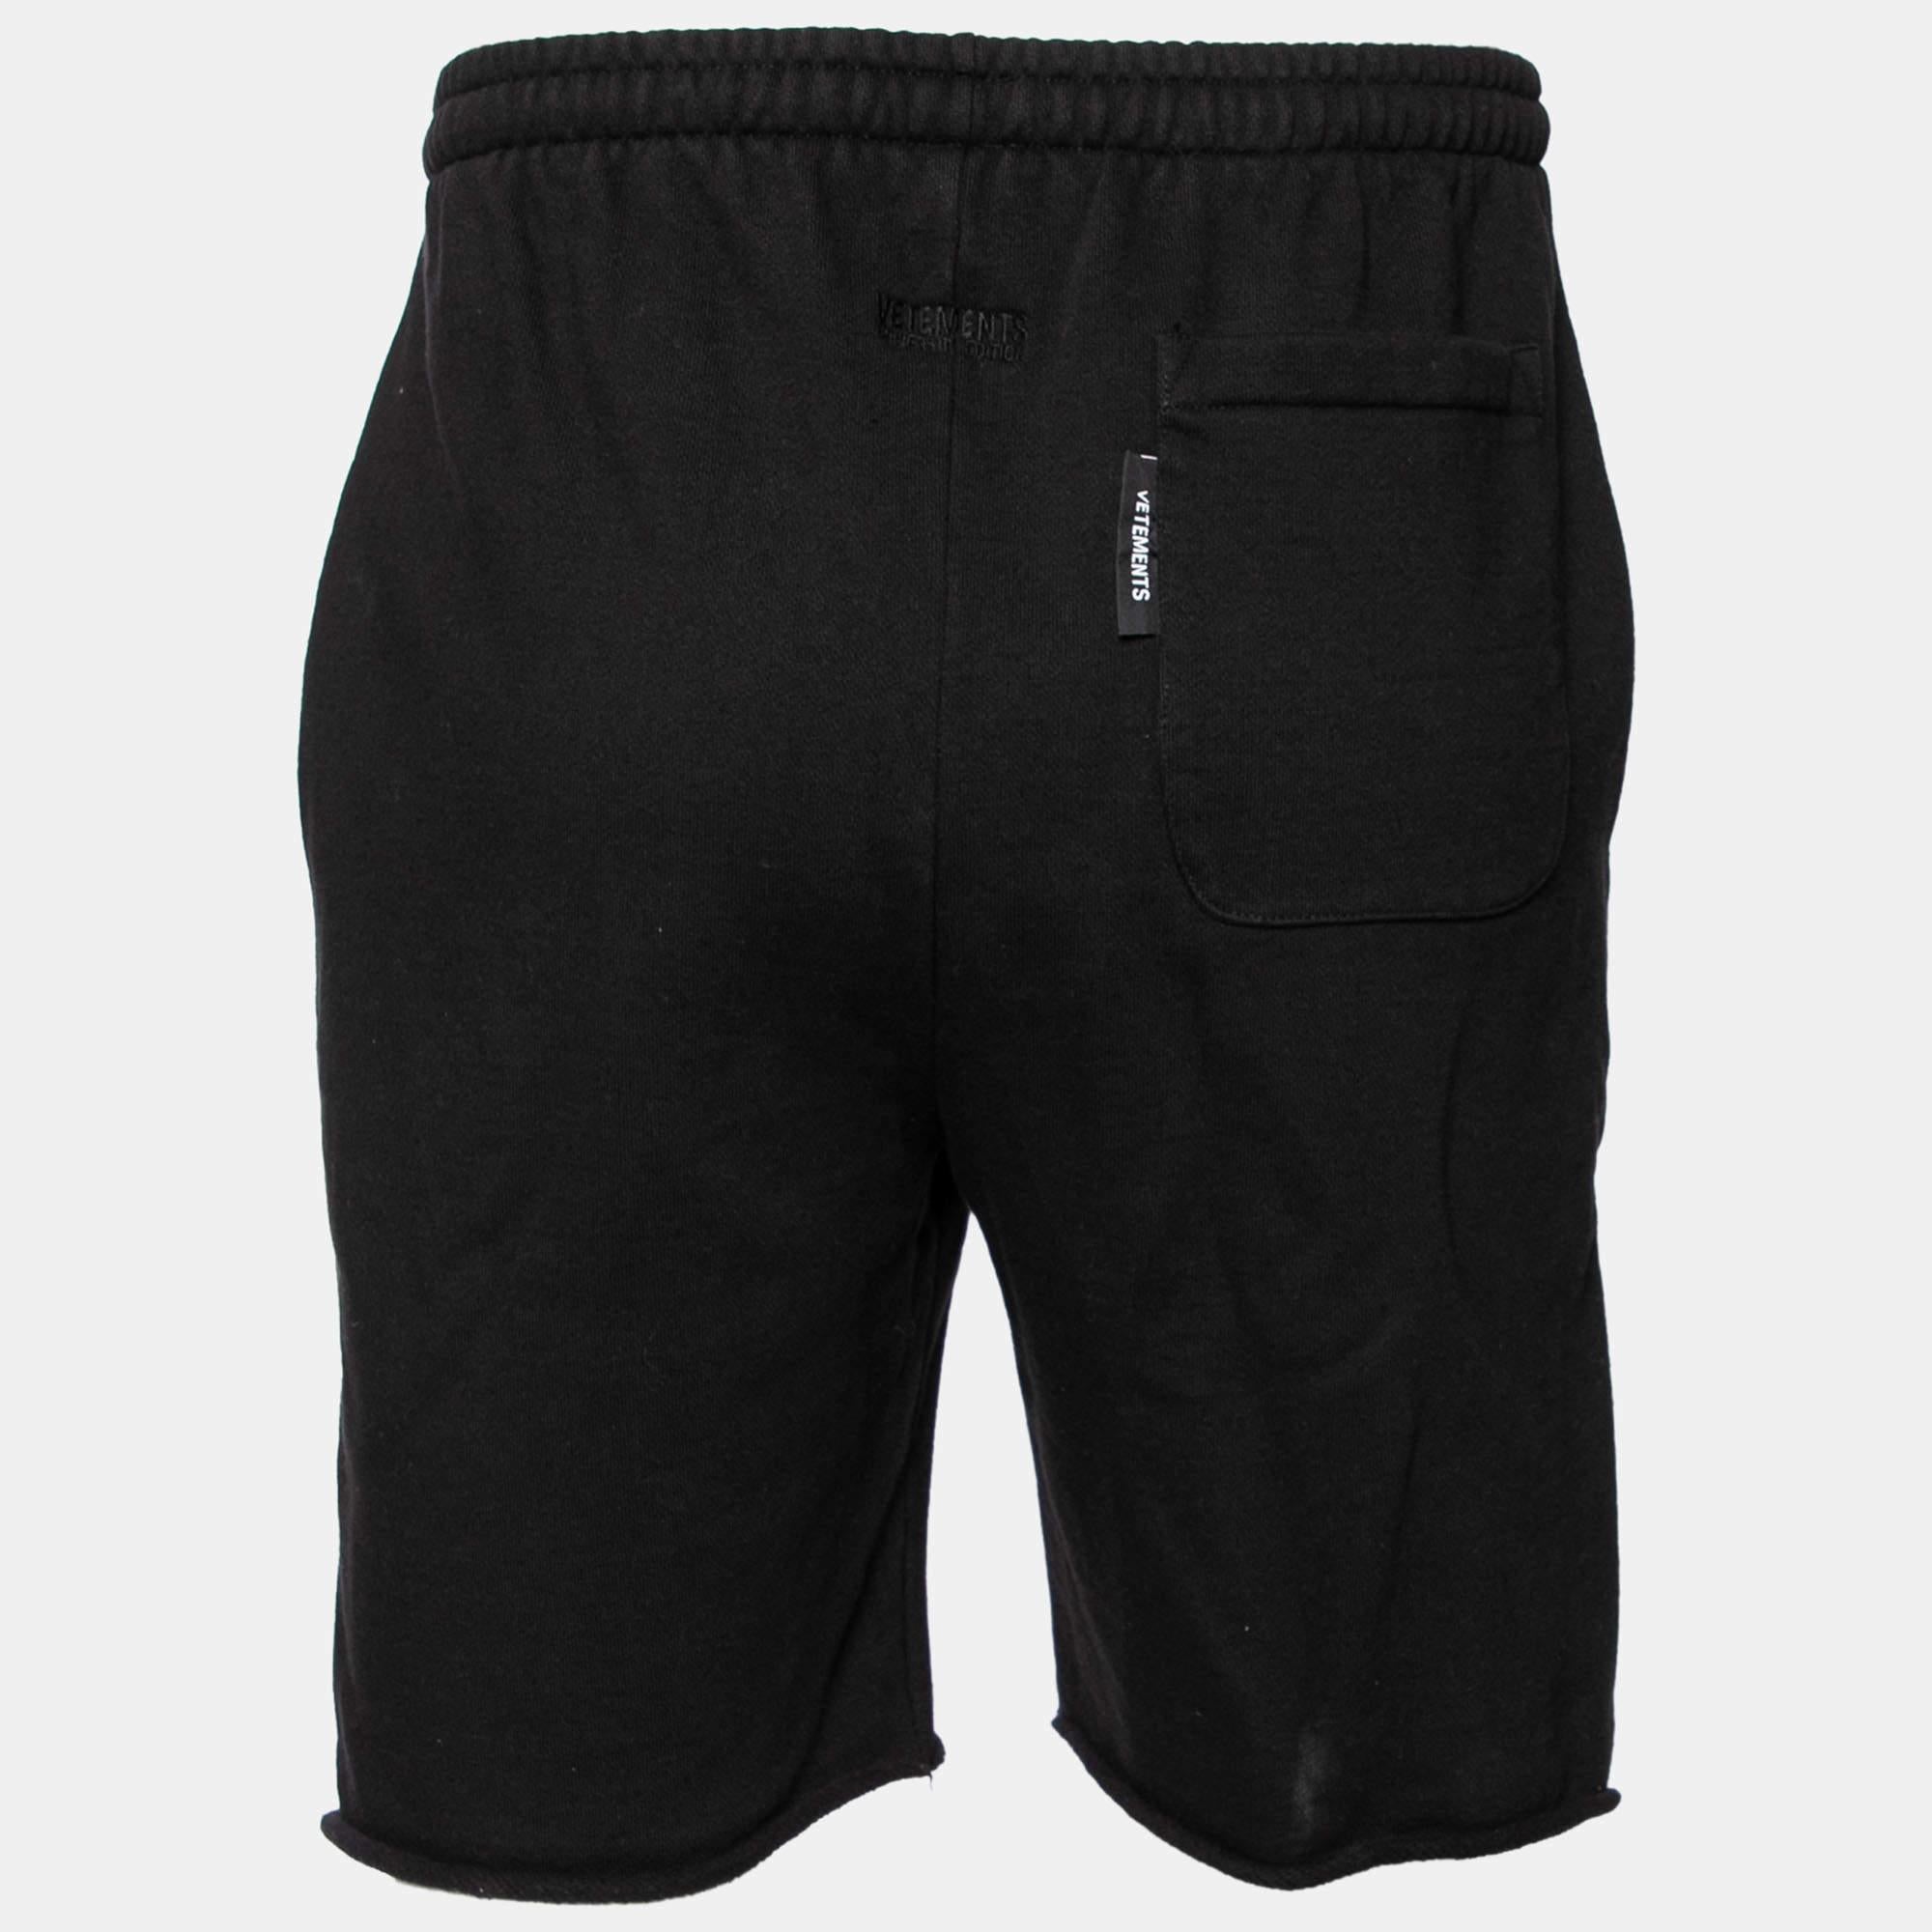 Whether you want to just lounge around or go out to run errands, these Vetements shorts will be a stylish pick and will make you feel comfortable all day. It has been made using high-grade materials and the creation will go well with sneakers and